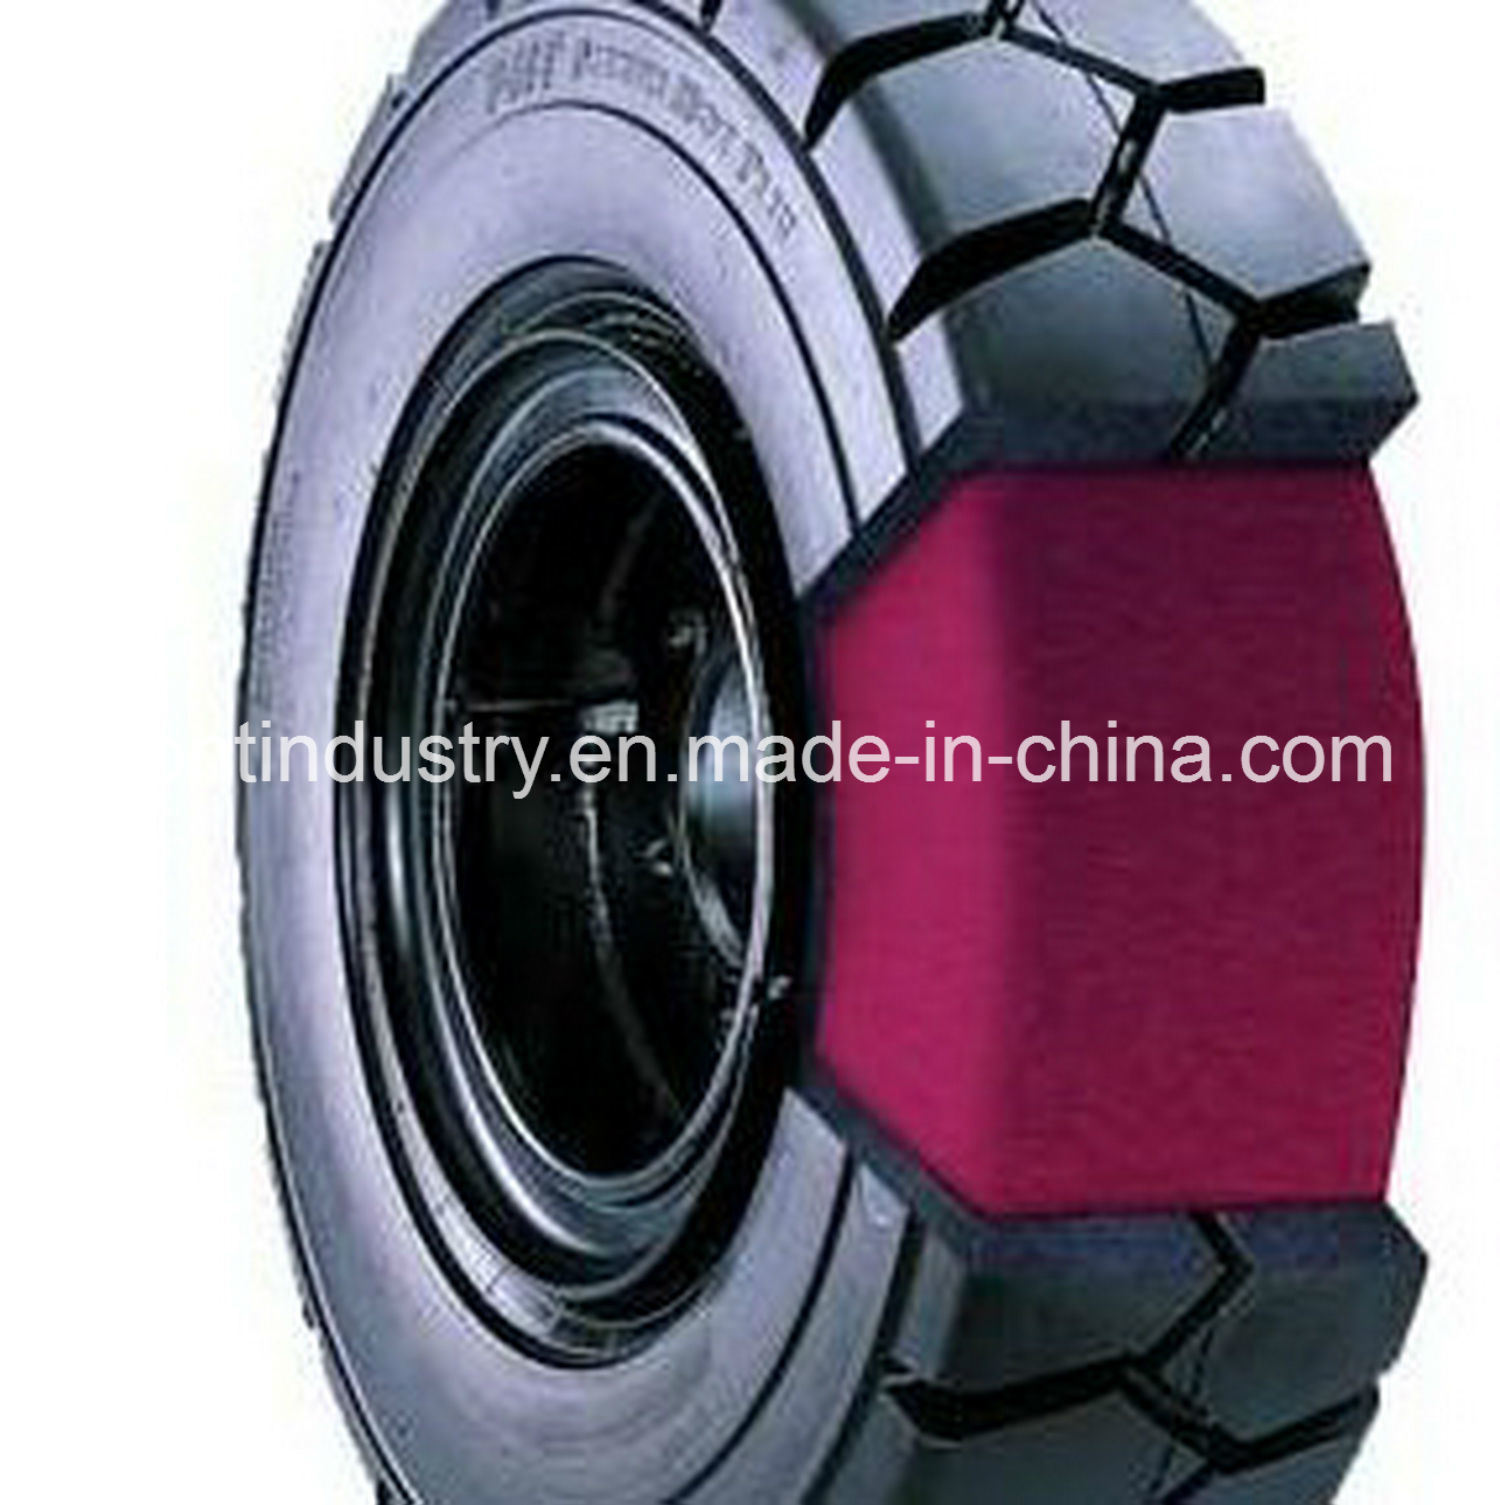 Polyurethane Filling Tyre Designed with Heat Resistant Tread